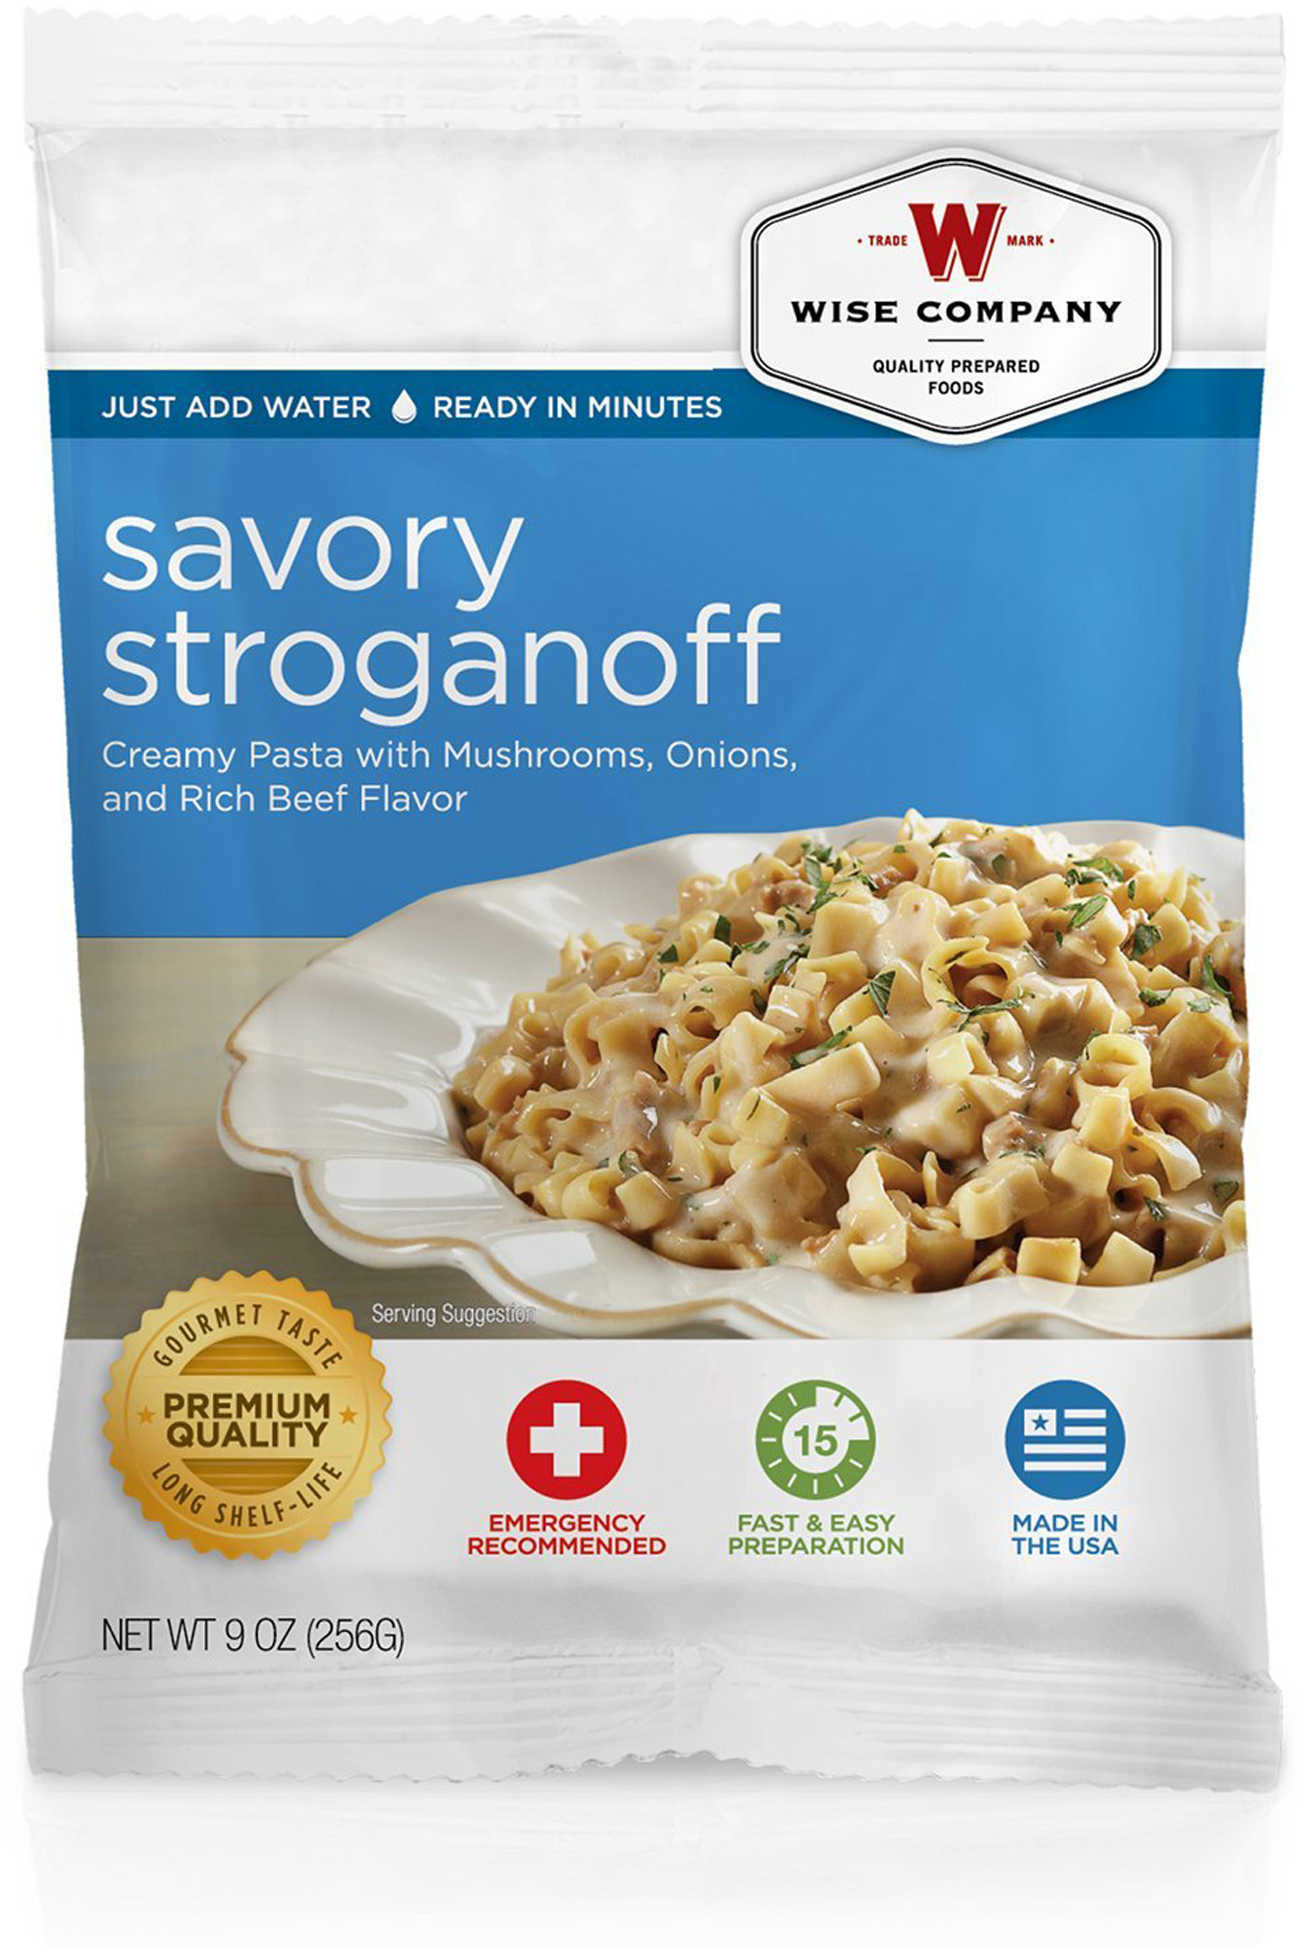 Wise Foods Entrée Dish Savory Stroganoff, 4 Servings Md: 2W02-203